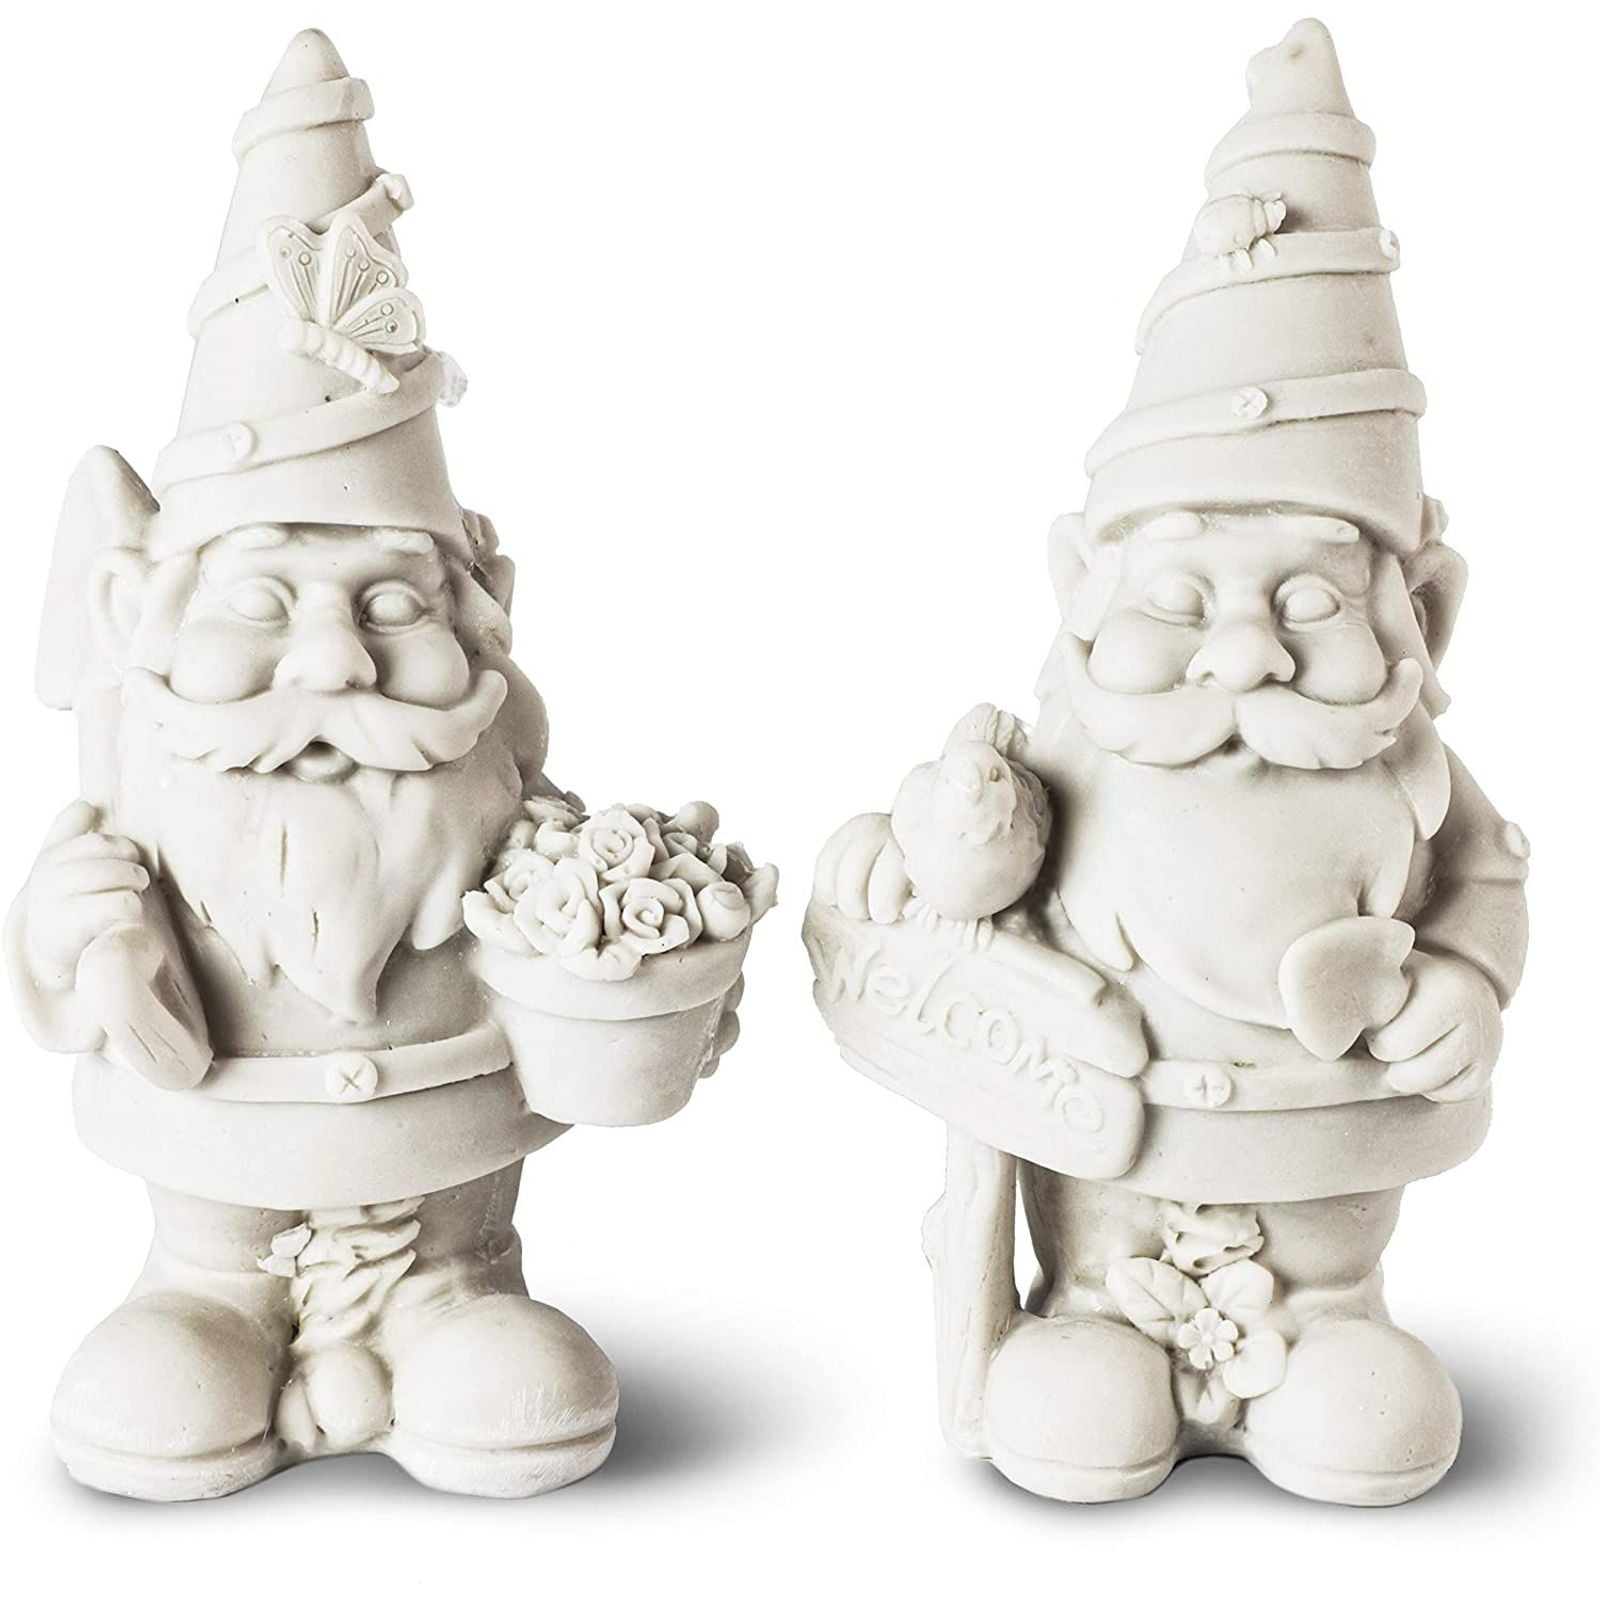 4 Pack Direct Global Trading Decorative Garden Stones With Gnome Design